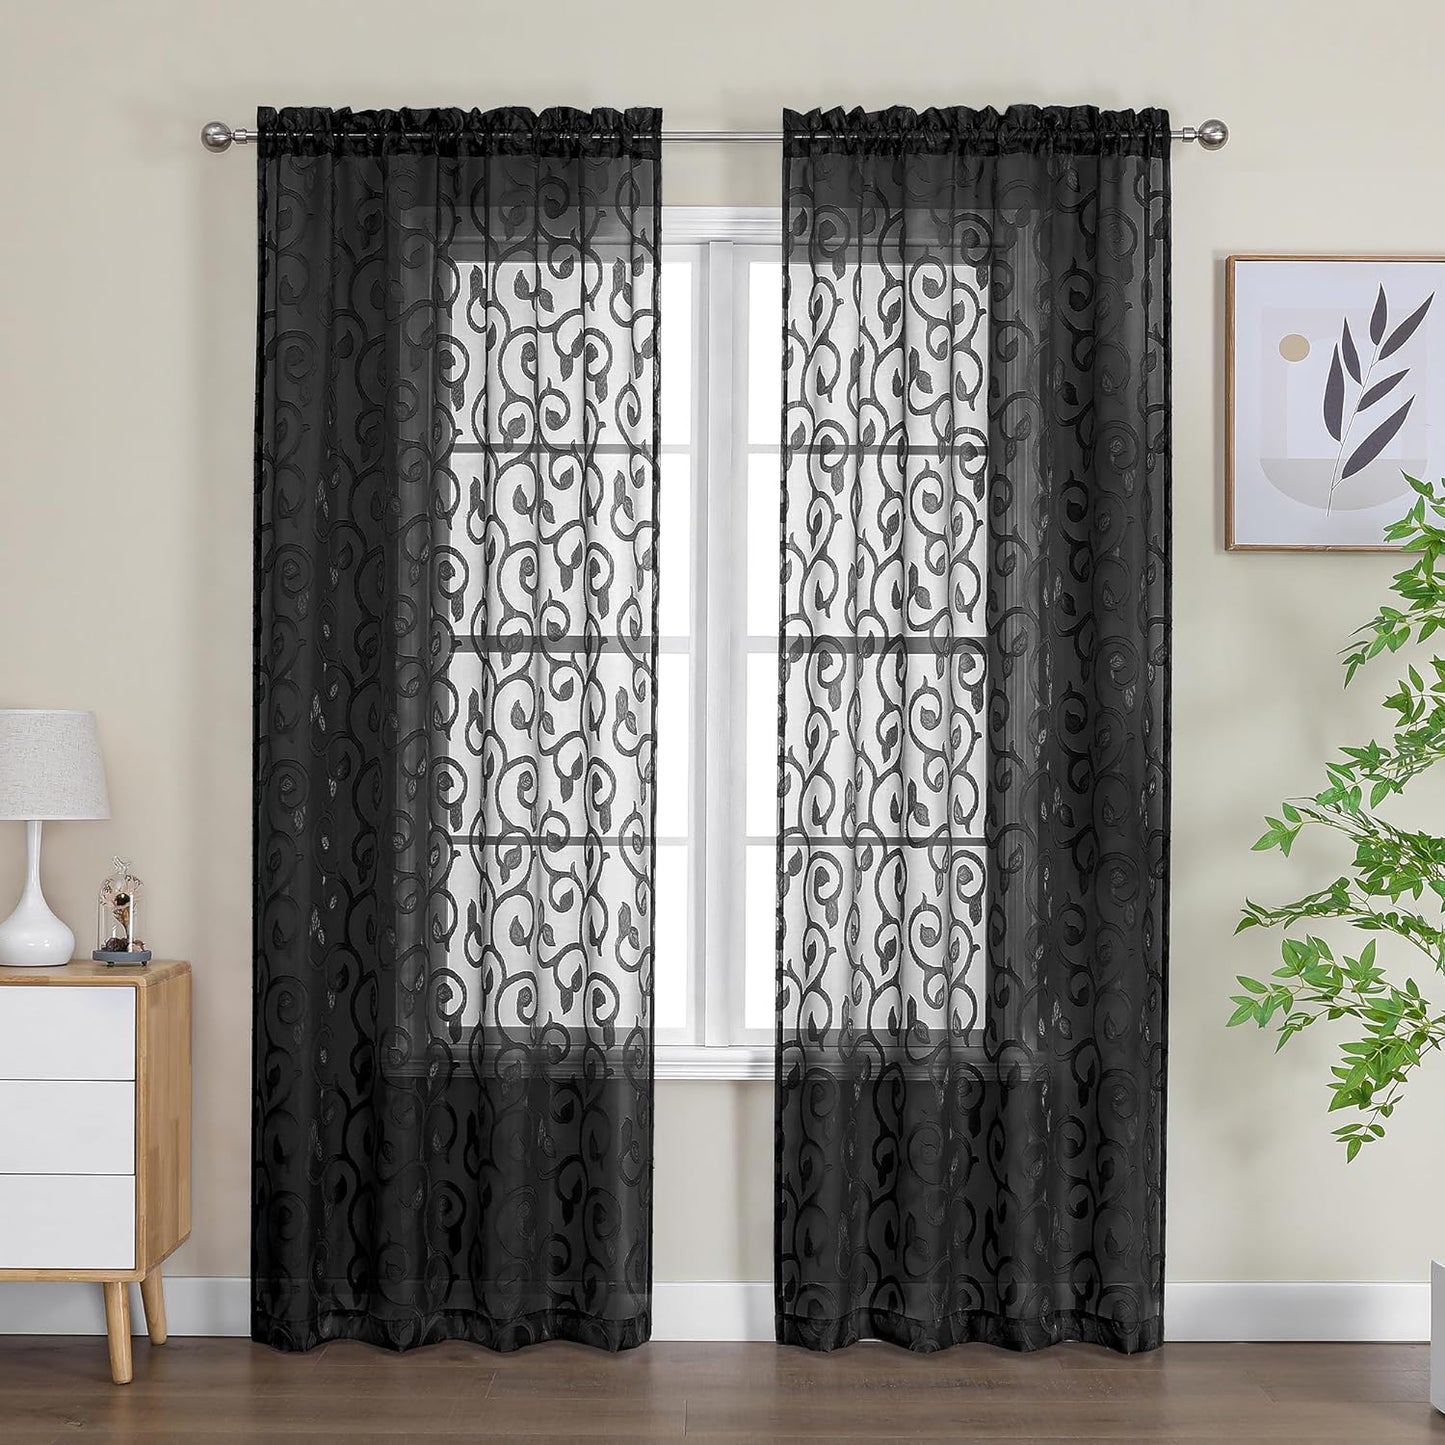 OWENIE Furman Sheer Curtains 84 Inches Long for Bedroom Living Room 2 Panels Set, Light Filtering Window Curtains, Semi Transparent Voile Top Dual Rod Pocket, Grey, 40Wx84L Inch, Total 84 Inches Width  OWENIE Black 40W X 72L 